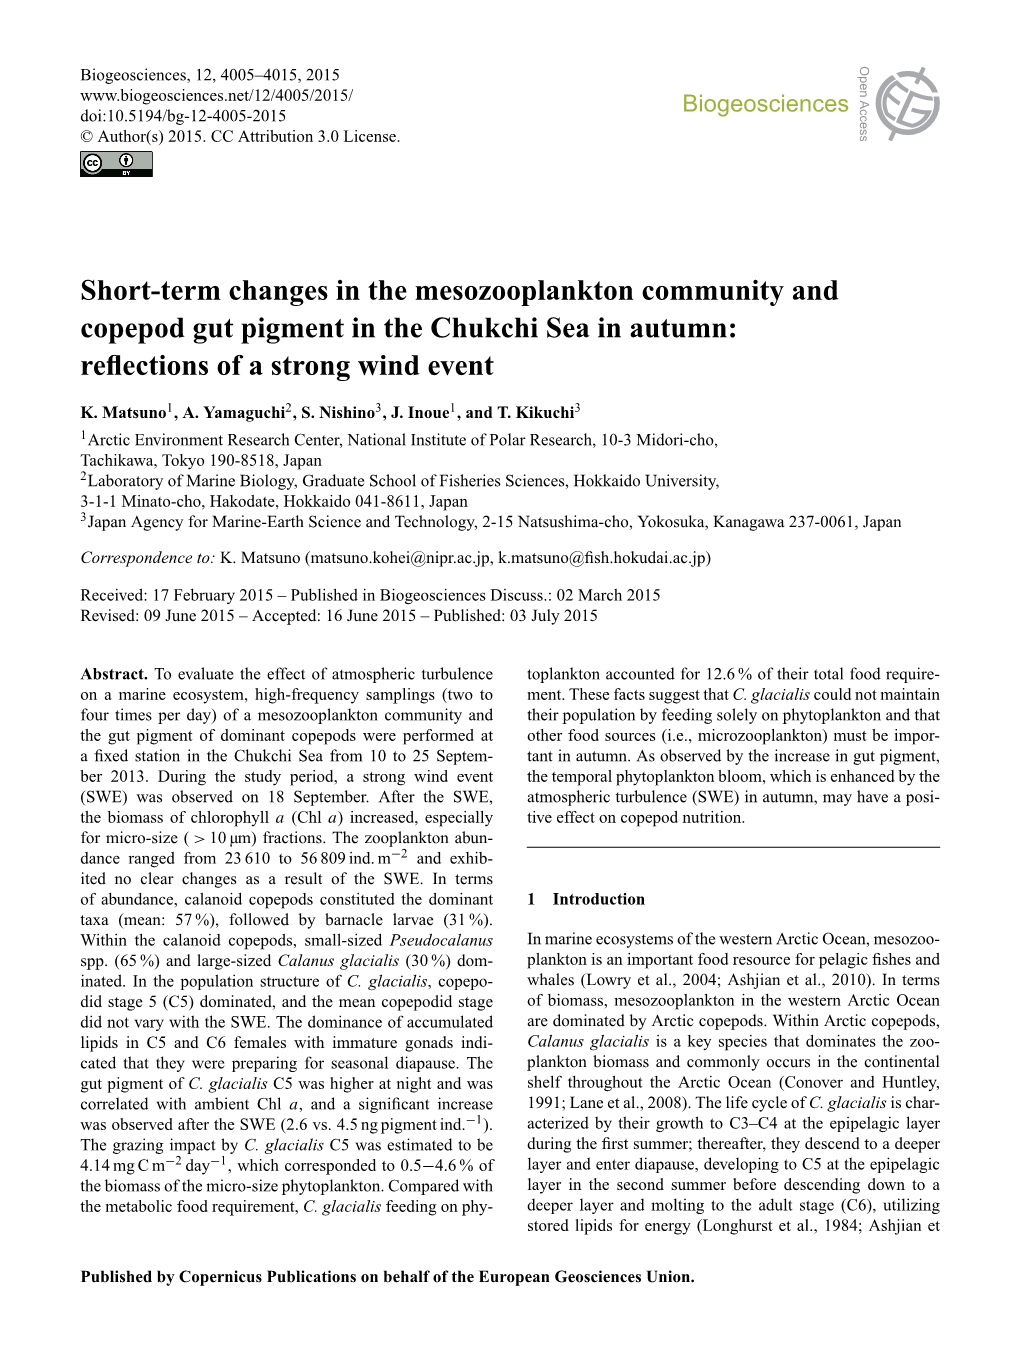 Article Is Available Online Gut of Zooplankton, and Some of the Consequences, Limnol